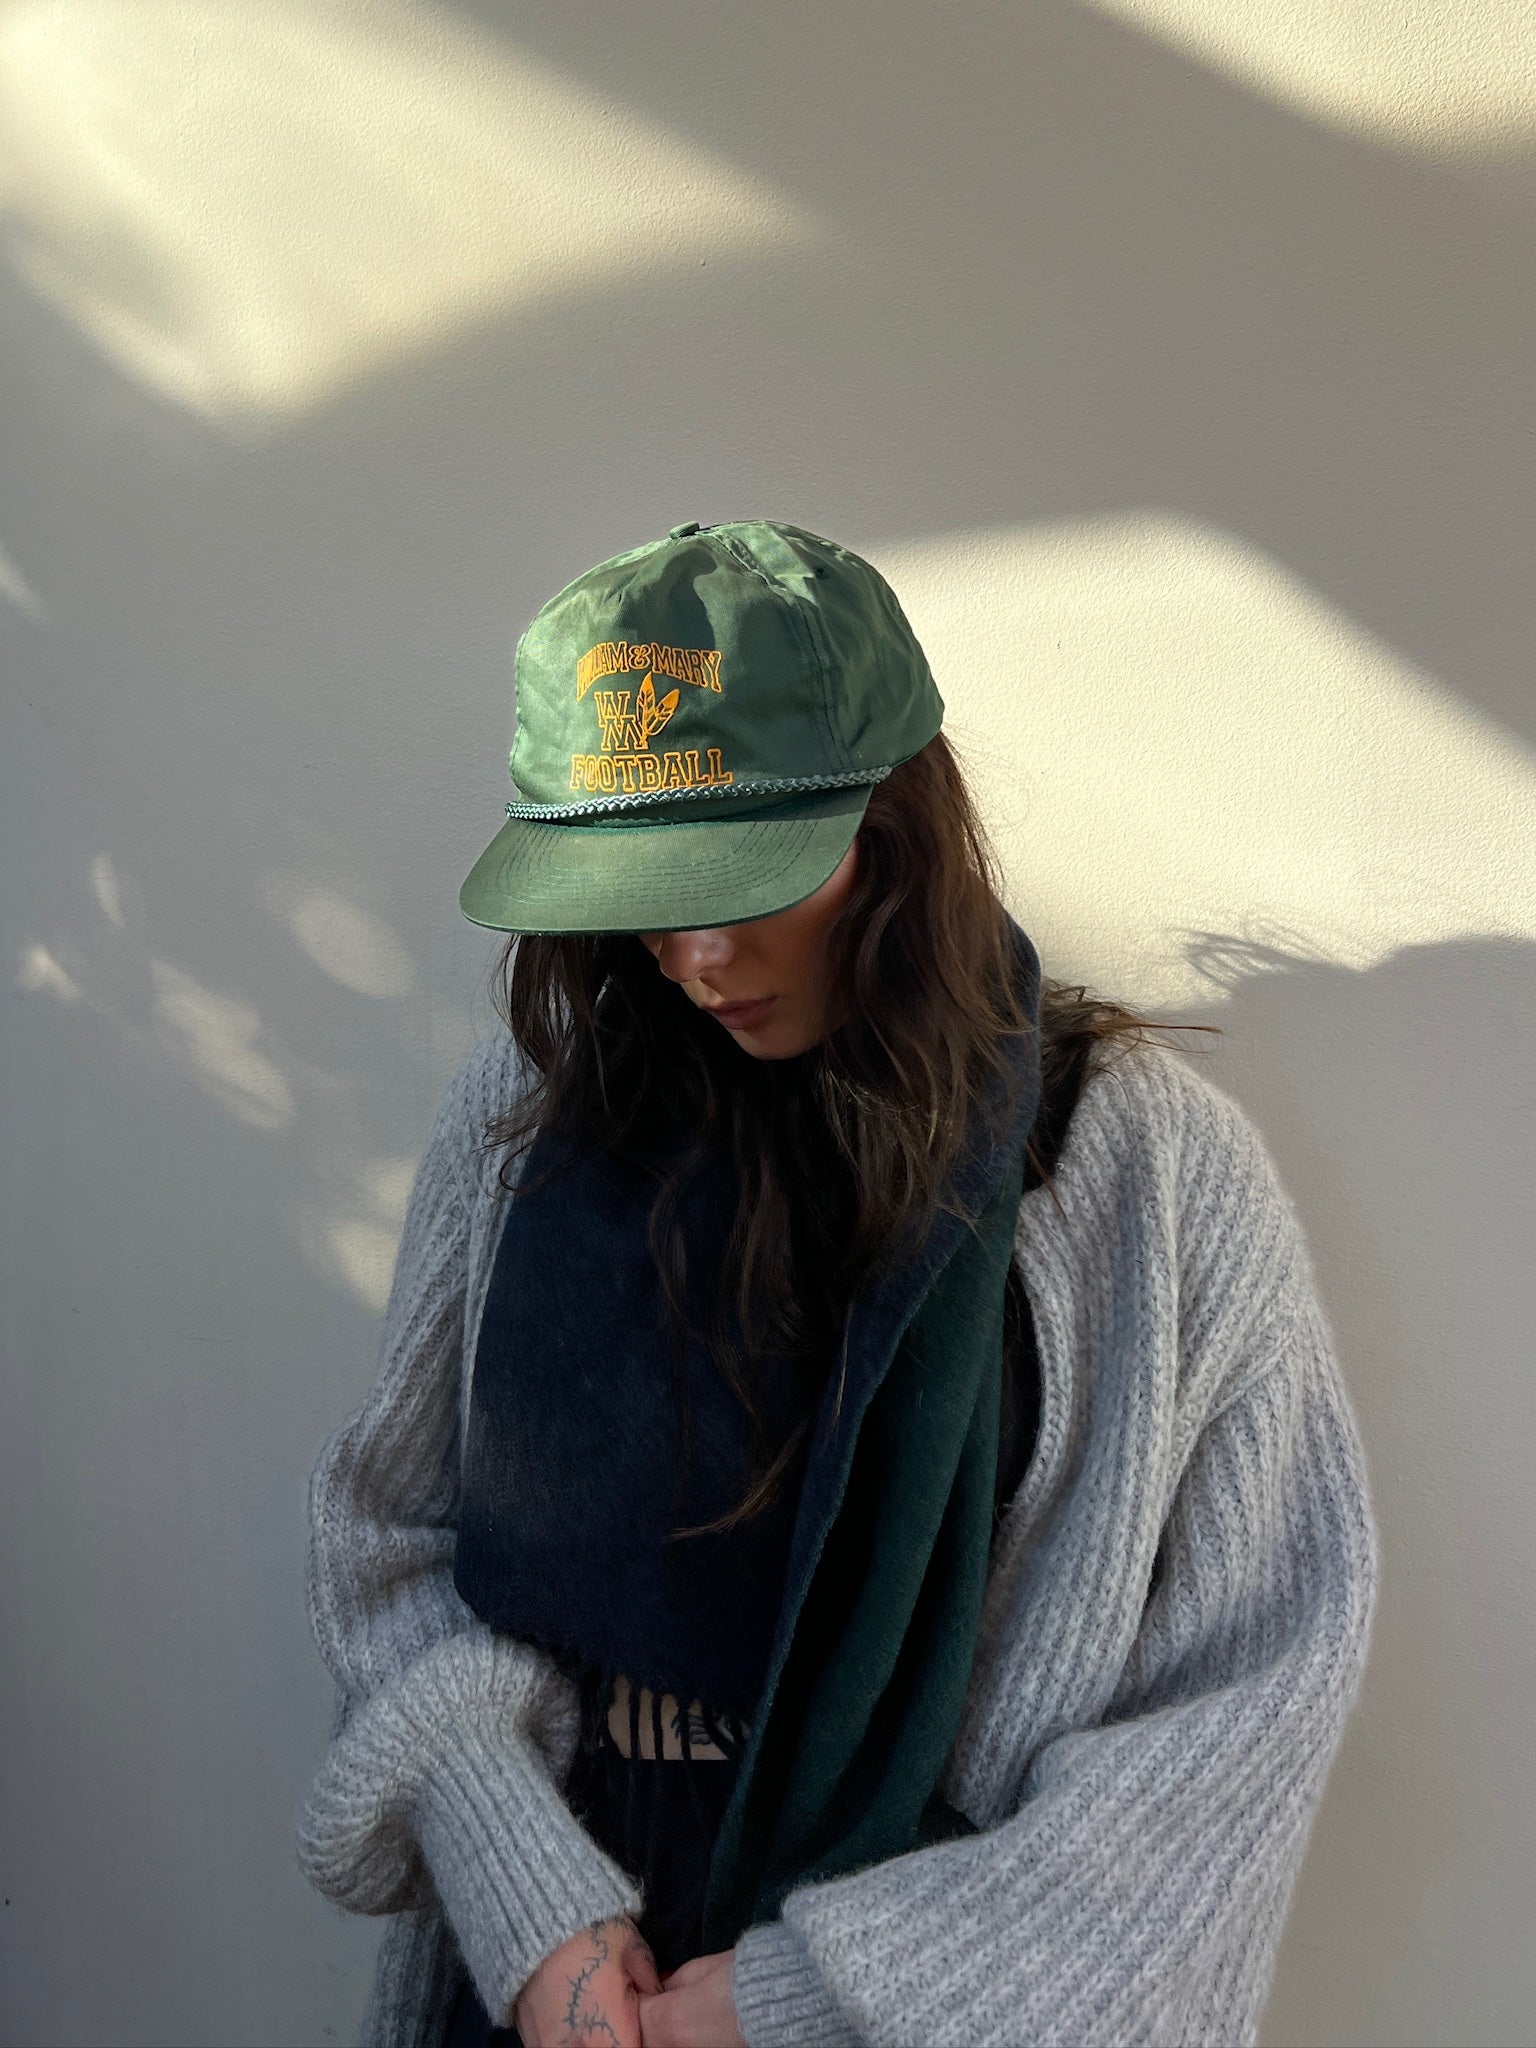 Vintage Forest "William & Mary" Ball Cap